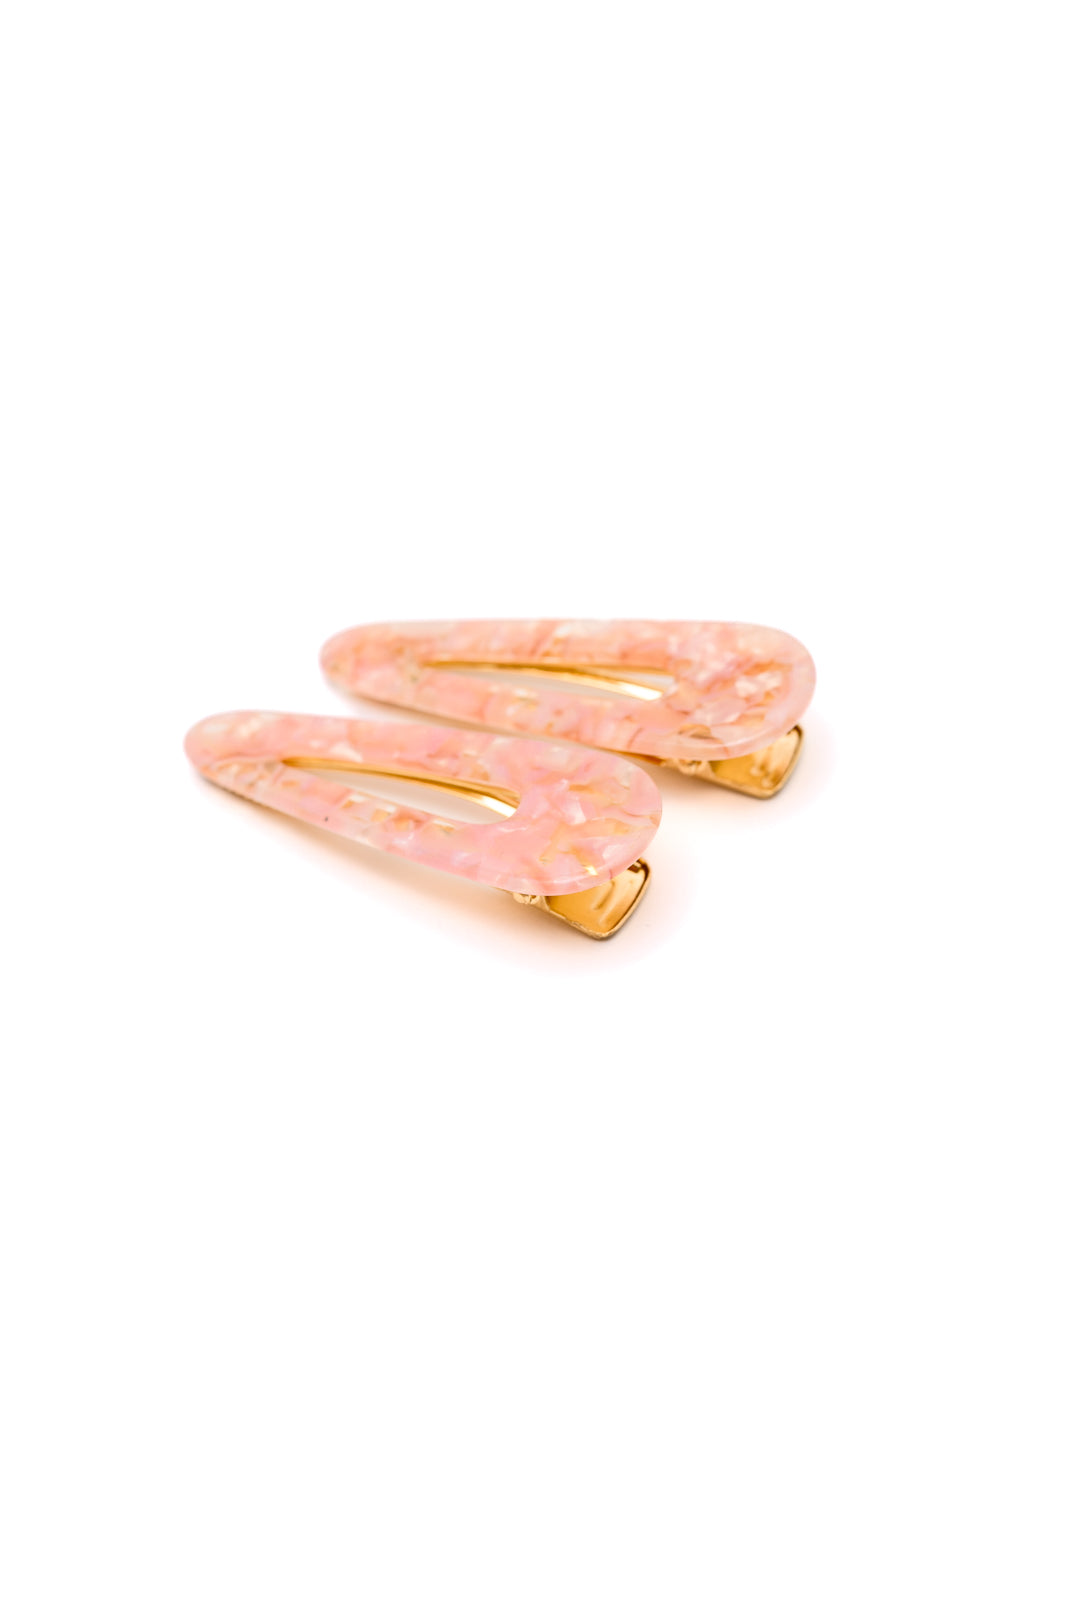 2 Pack of Teardrop Hair Clips in Pink Shell